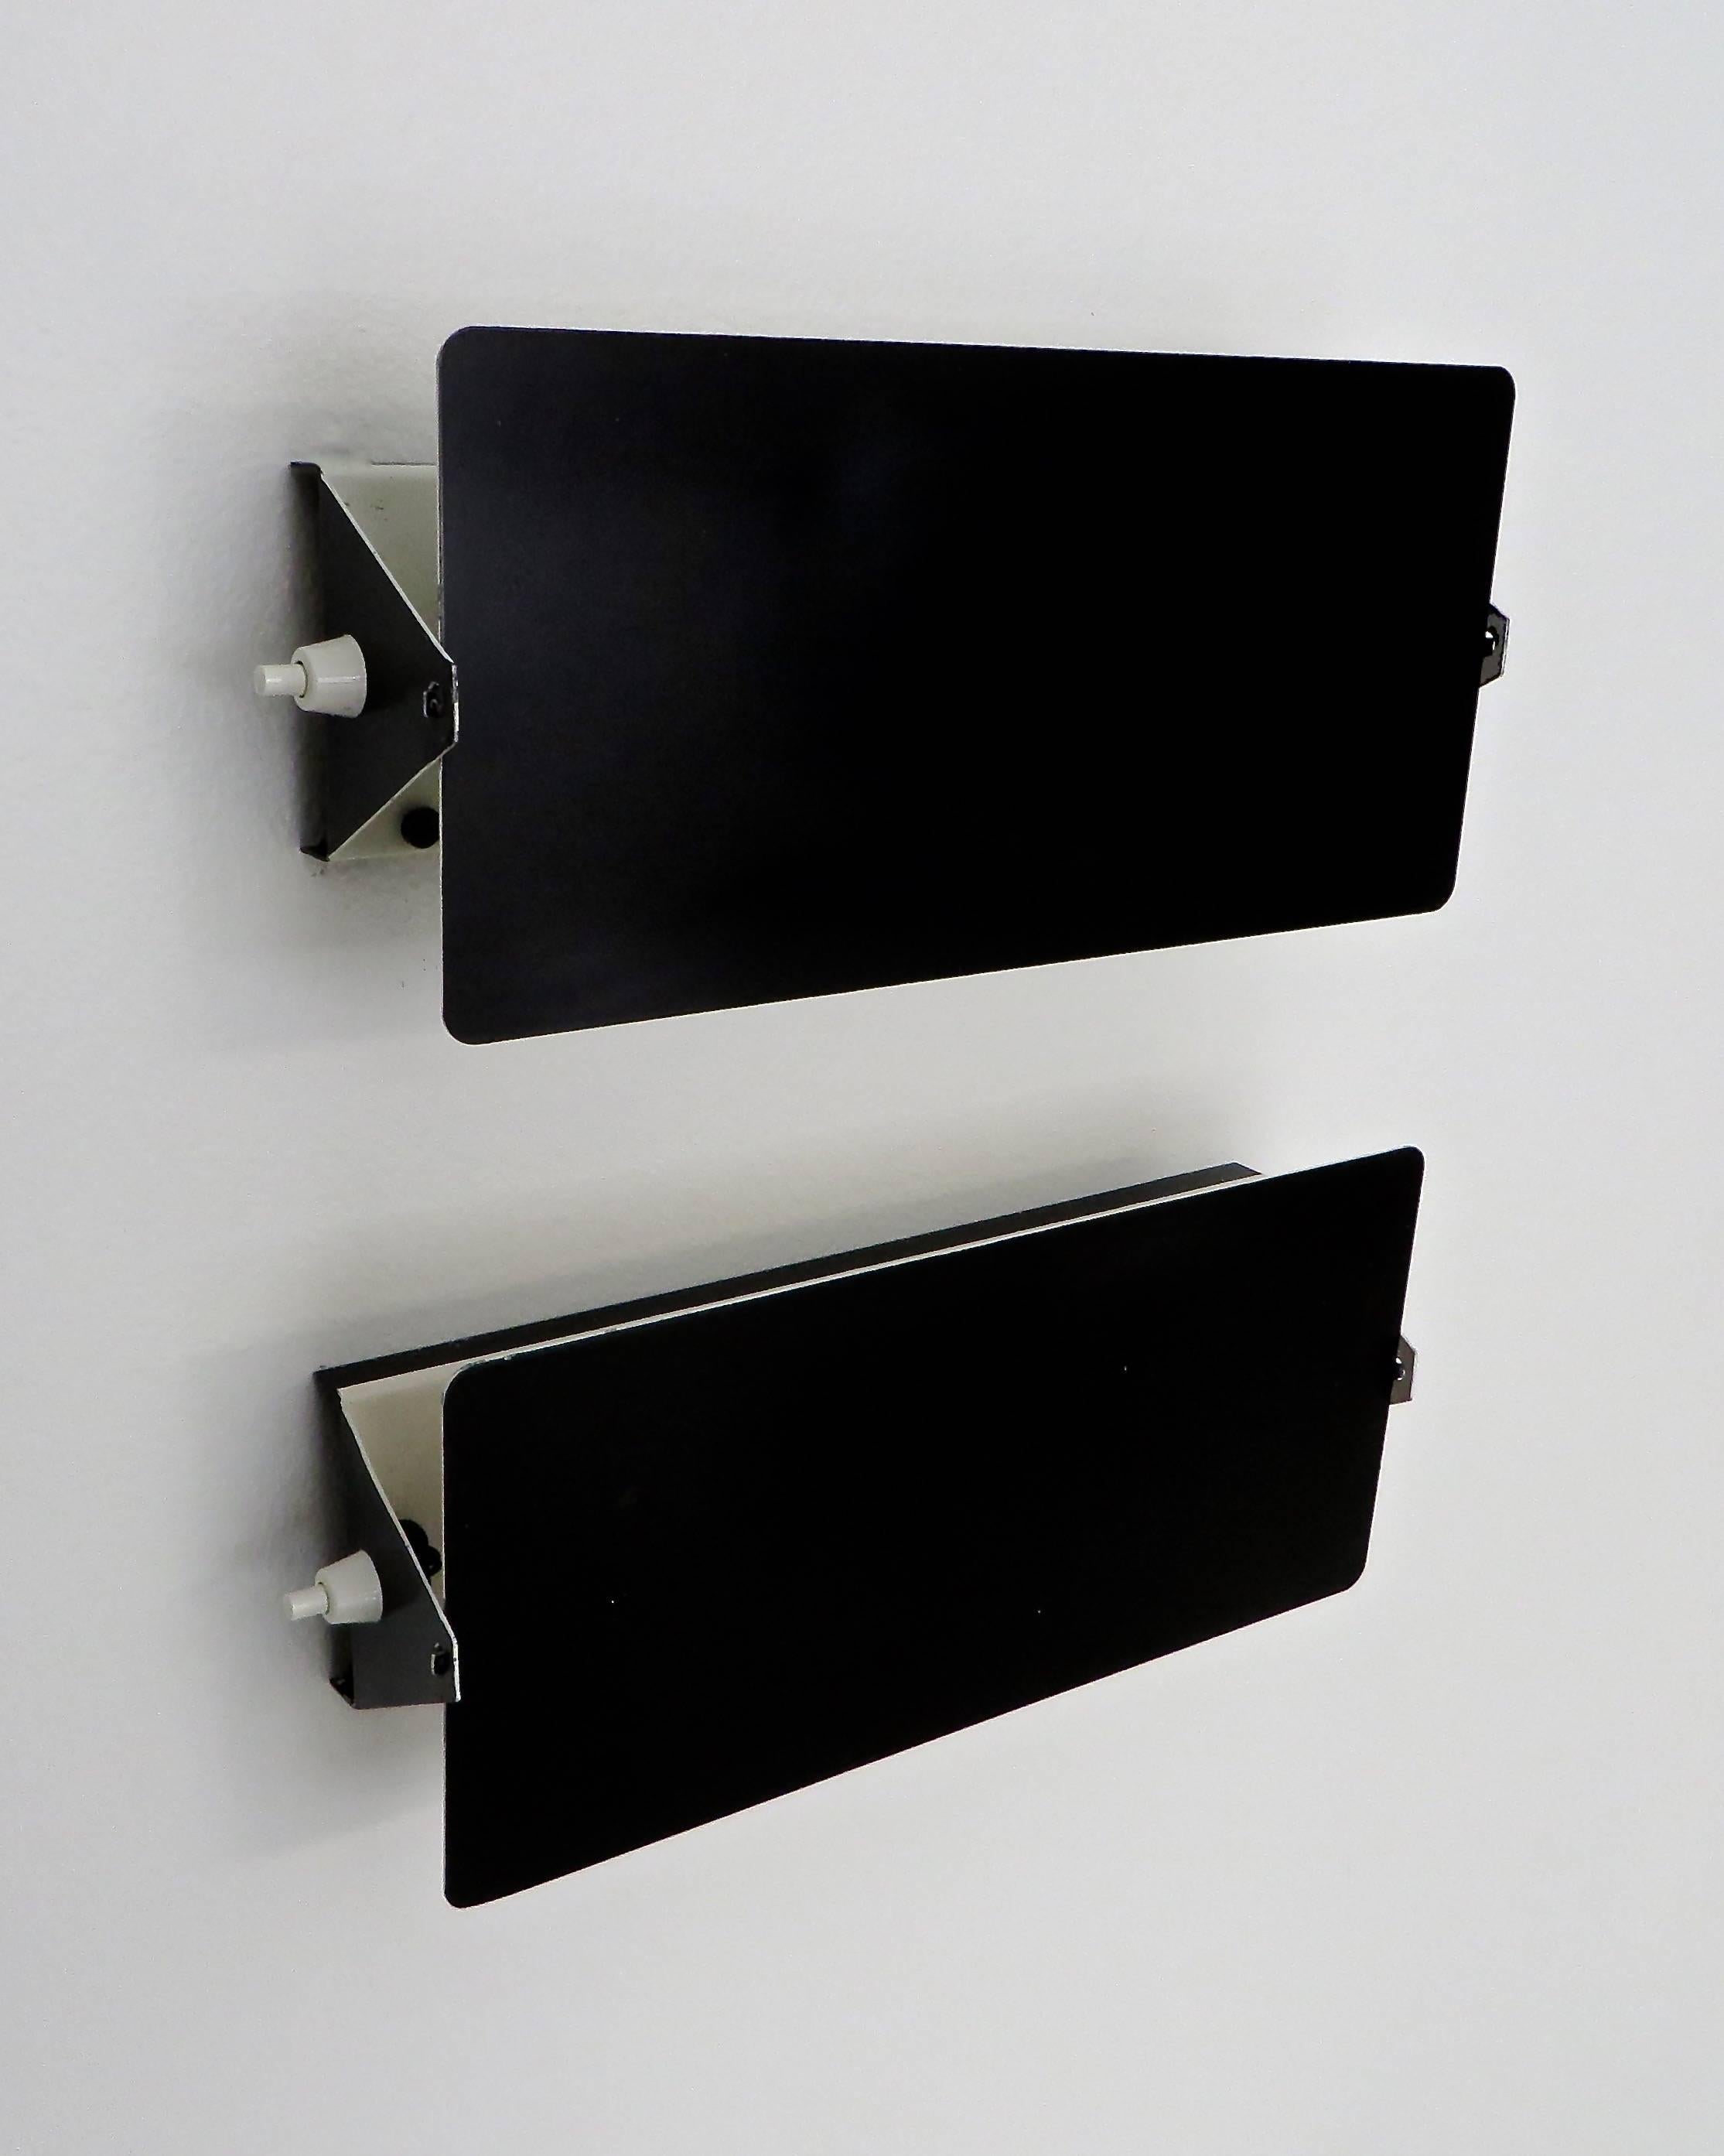 Charlotte Perriand double socket vintage CP-1 sconces, Steph Simon edition, Paris, France.
The iconic black enamel outside with white interior and black sockets from Les Arcs ski resort. 
Original finish and sockets and switches. Five single